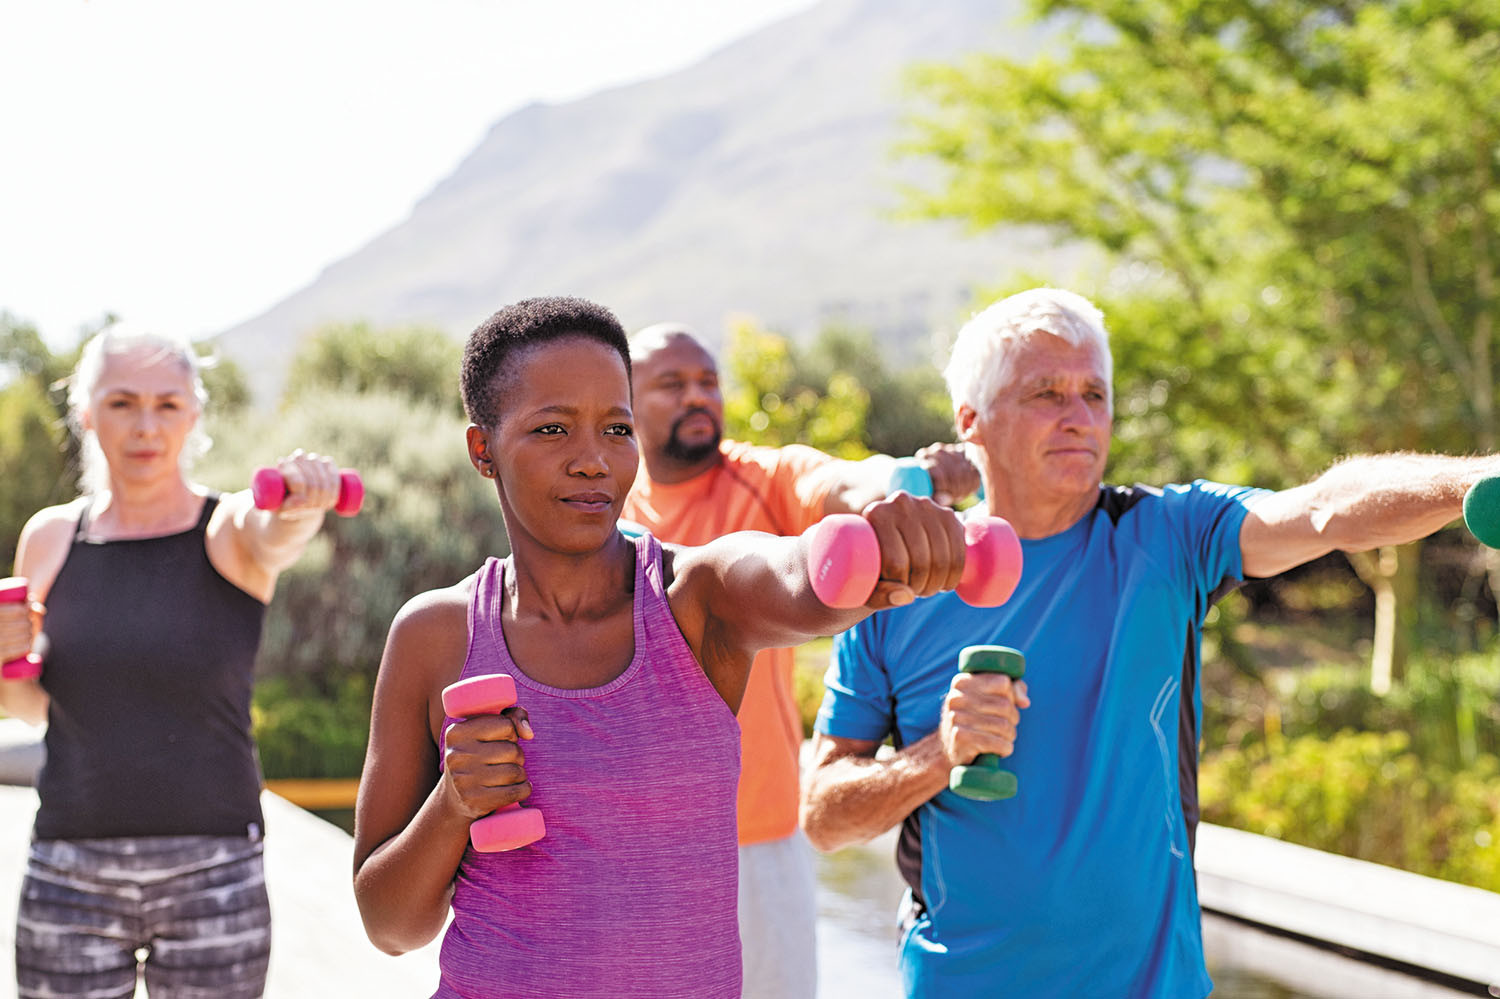 How To Start Exercising: 10 Ways to Get into a Spring Exercise Regimen